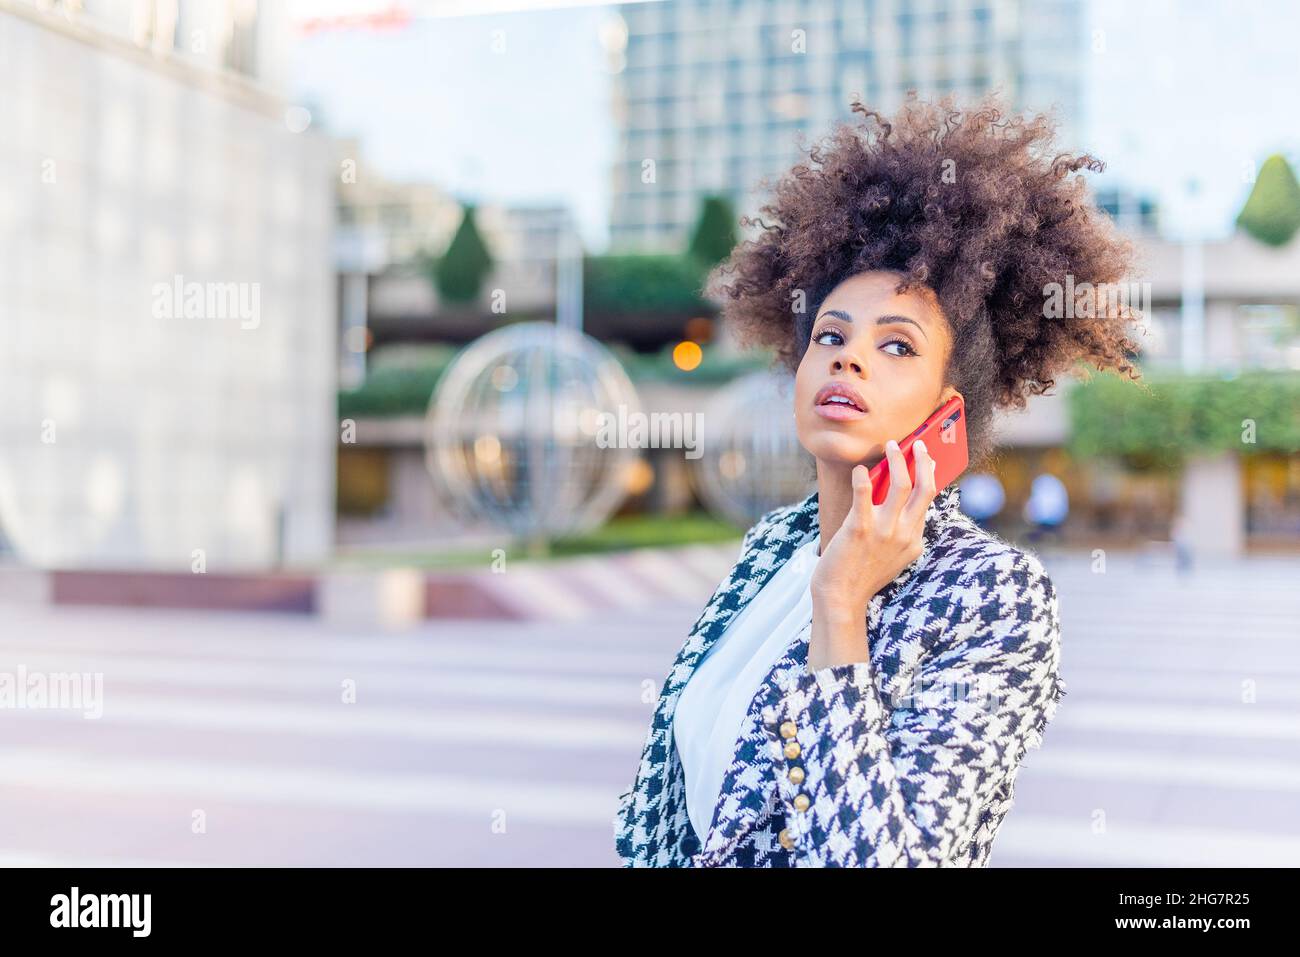 distracted woman looking away while talking on the phone Stock Photo